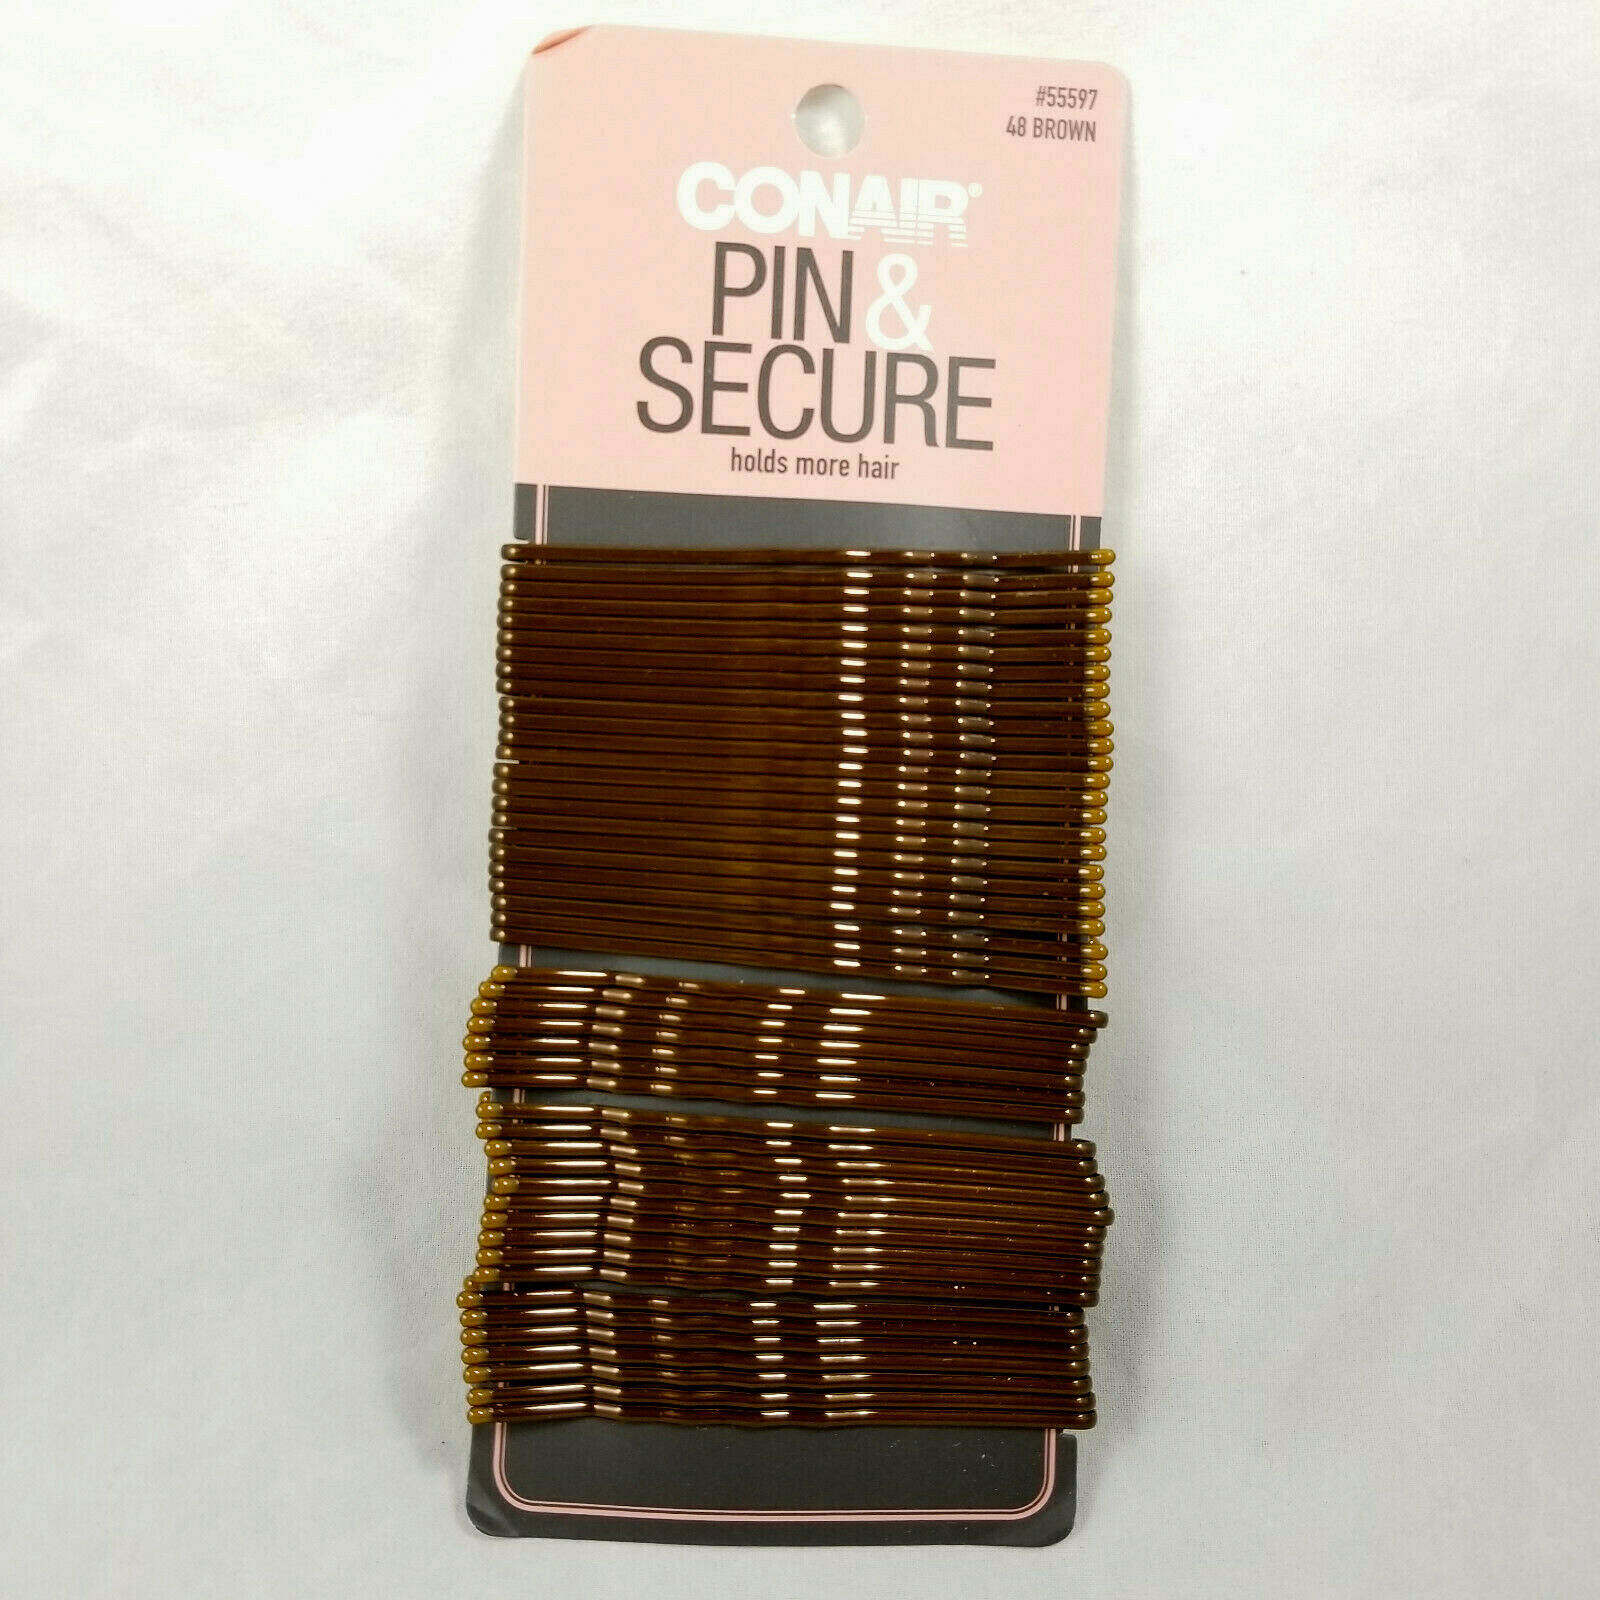 Primary image for Conair Pin & Secure Bobby Pins Brown Bigger Size Holds More Hair 48 Pins